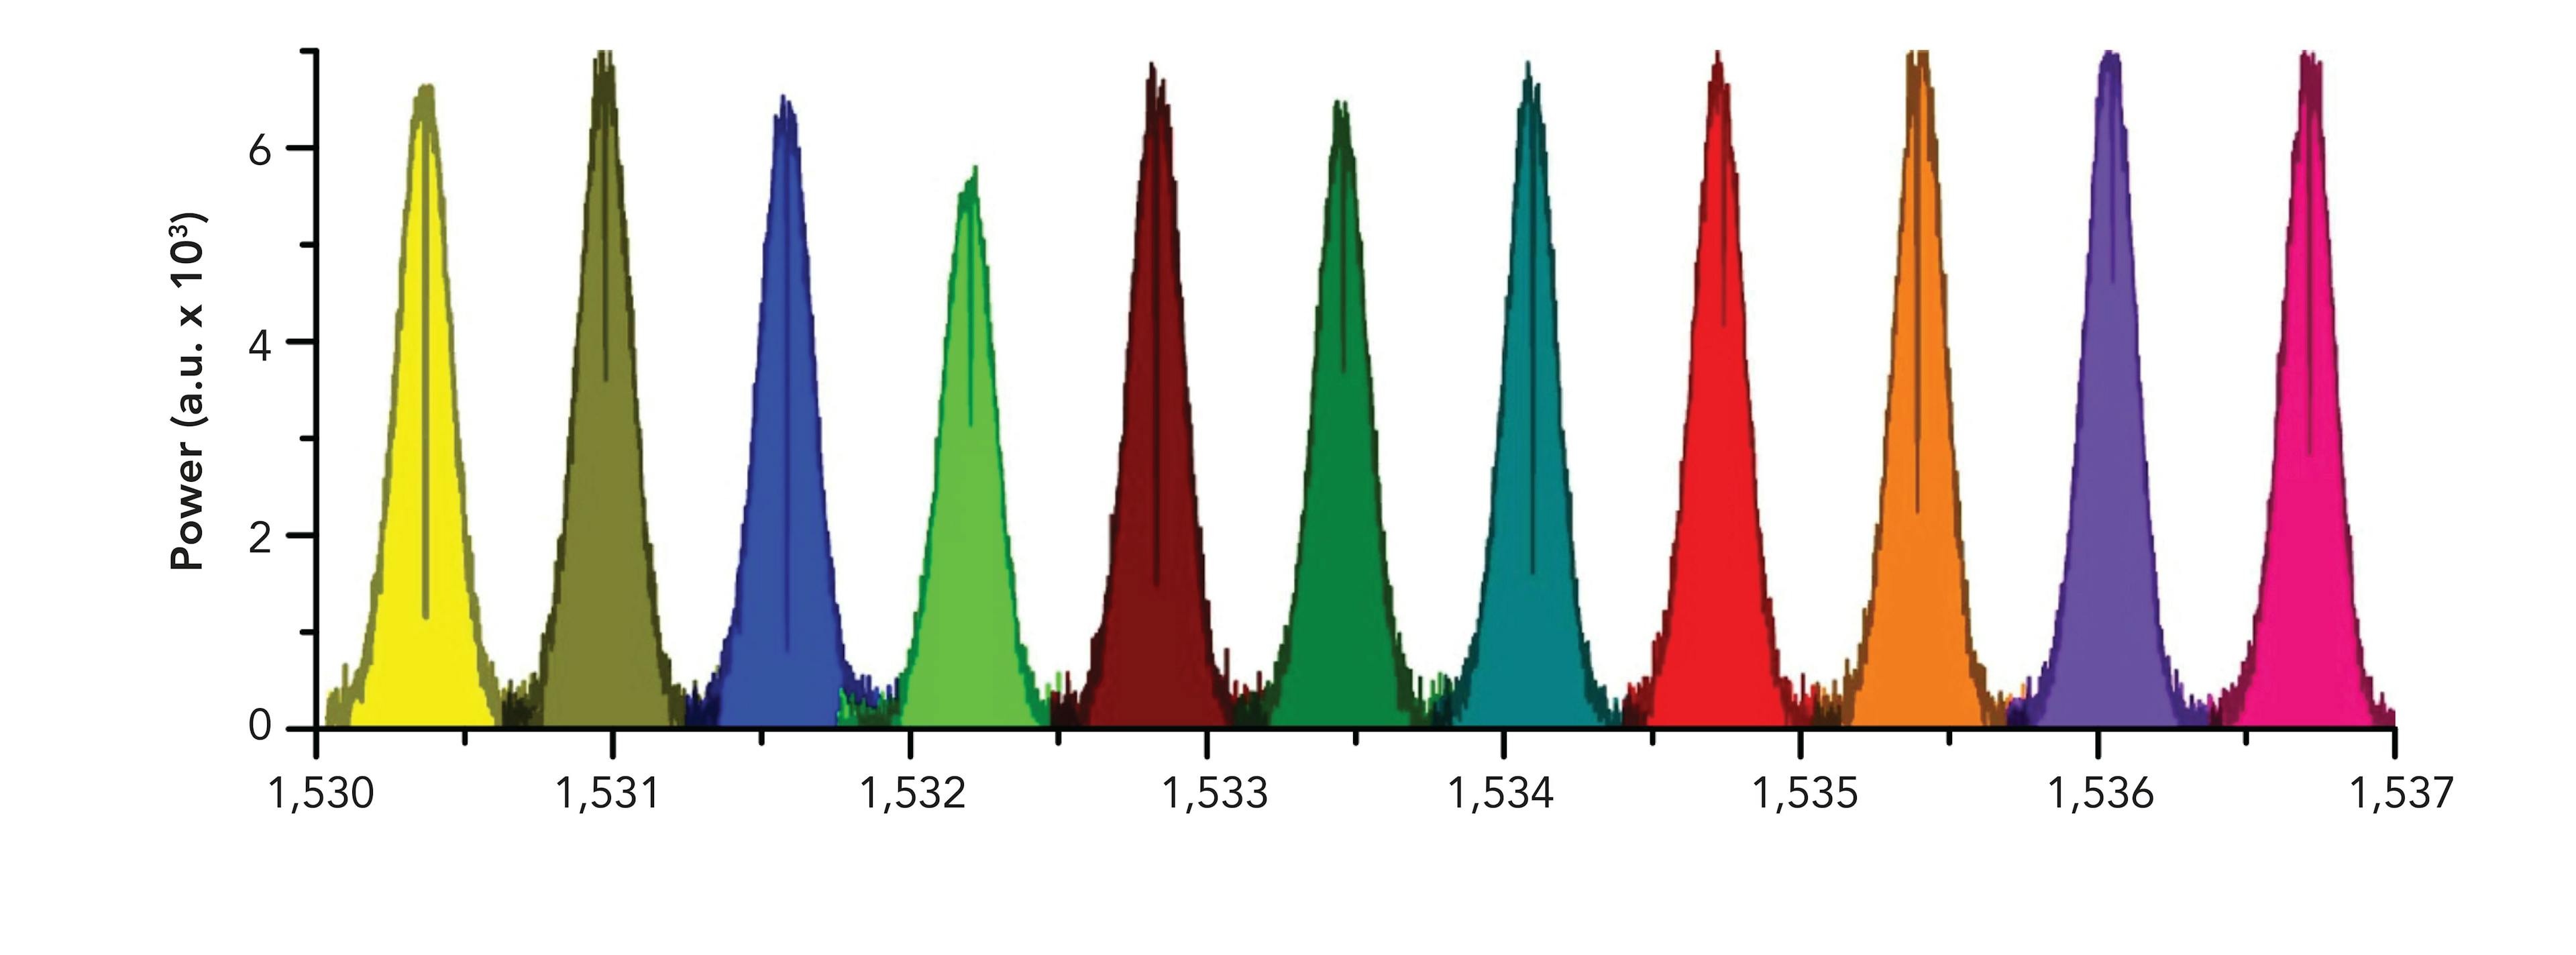 FIGURE 2: A sequence of transmission spectra by a 142-mm cell filled with pure 12C2H2 at pressure of 10 mbar acquired with the MM fiber spectrometer. The sequence has been measured by setting a tunable filter (−10 dB band of 0.6 nm) at the desired central wavelength and imaging the speckle patterns at the MM fiber output onto an InGaAs camera (40-μs exposure time, 10 frames averaged). Each spectrum spans 1 nm and is sampled by ~500 comb lines.